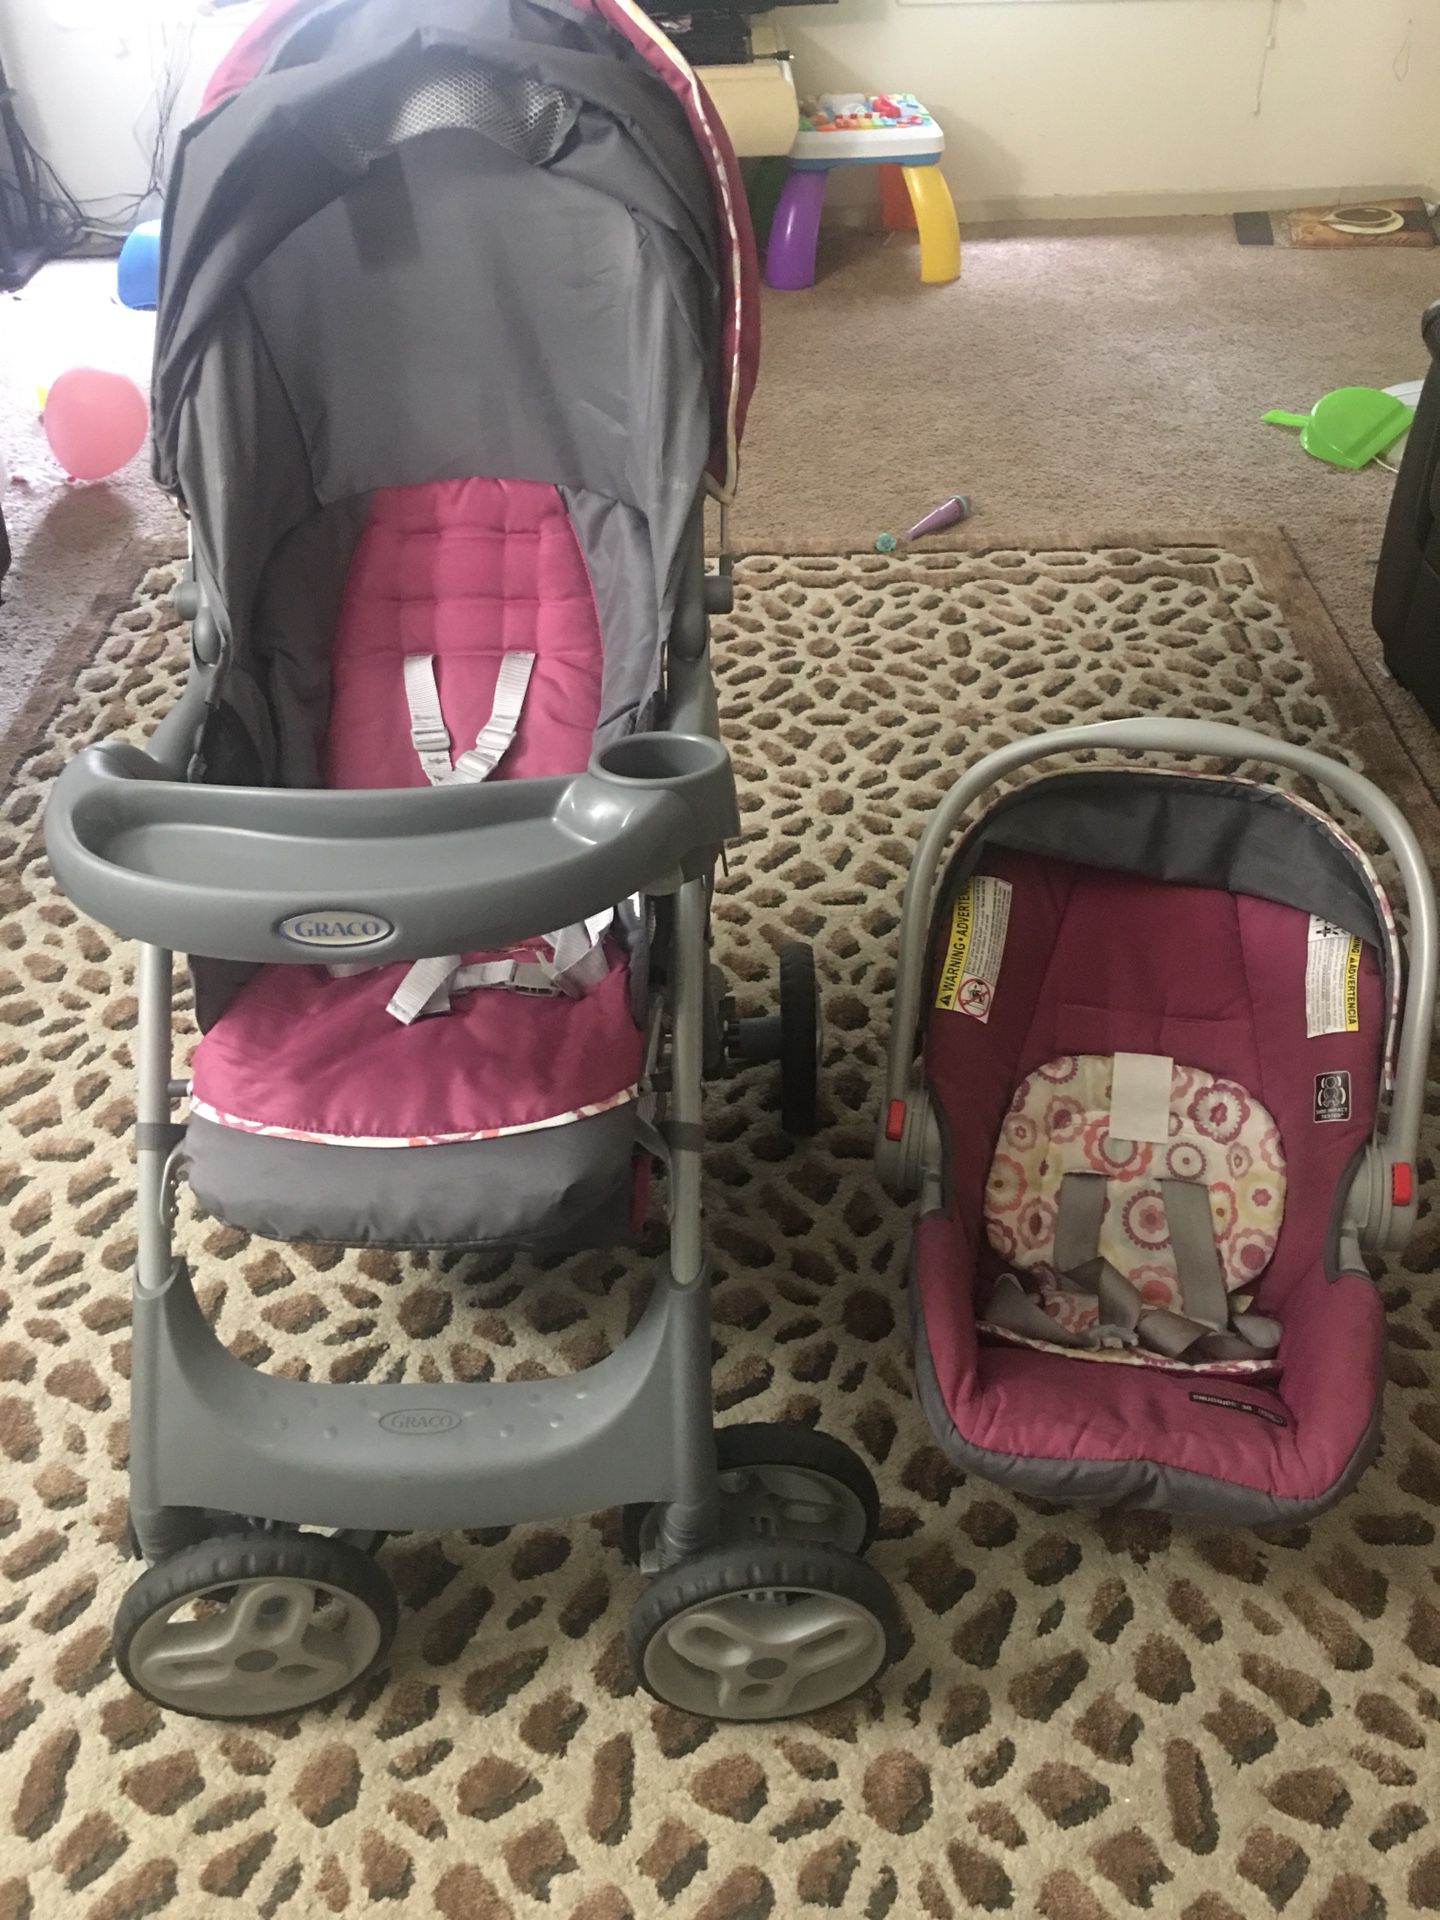 Graco infant car seat and stroller